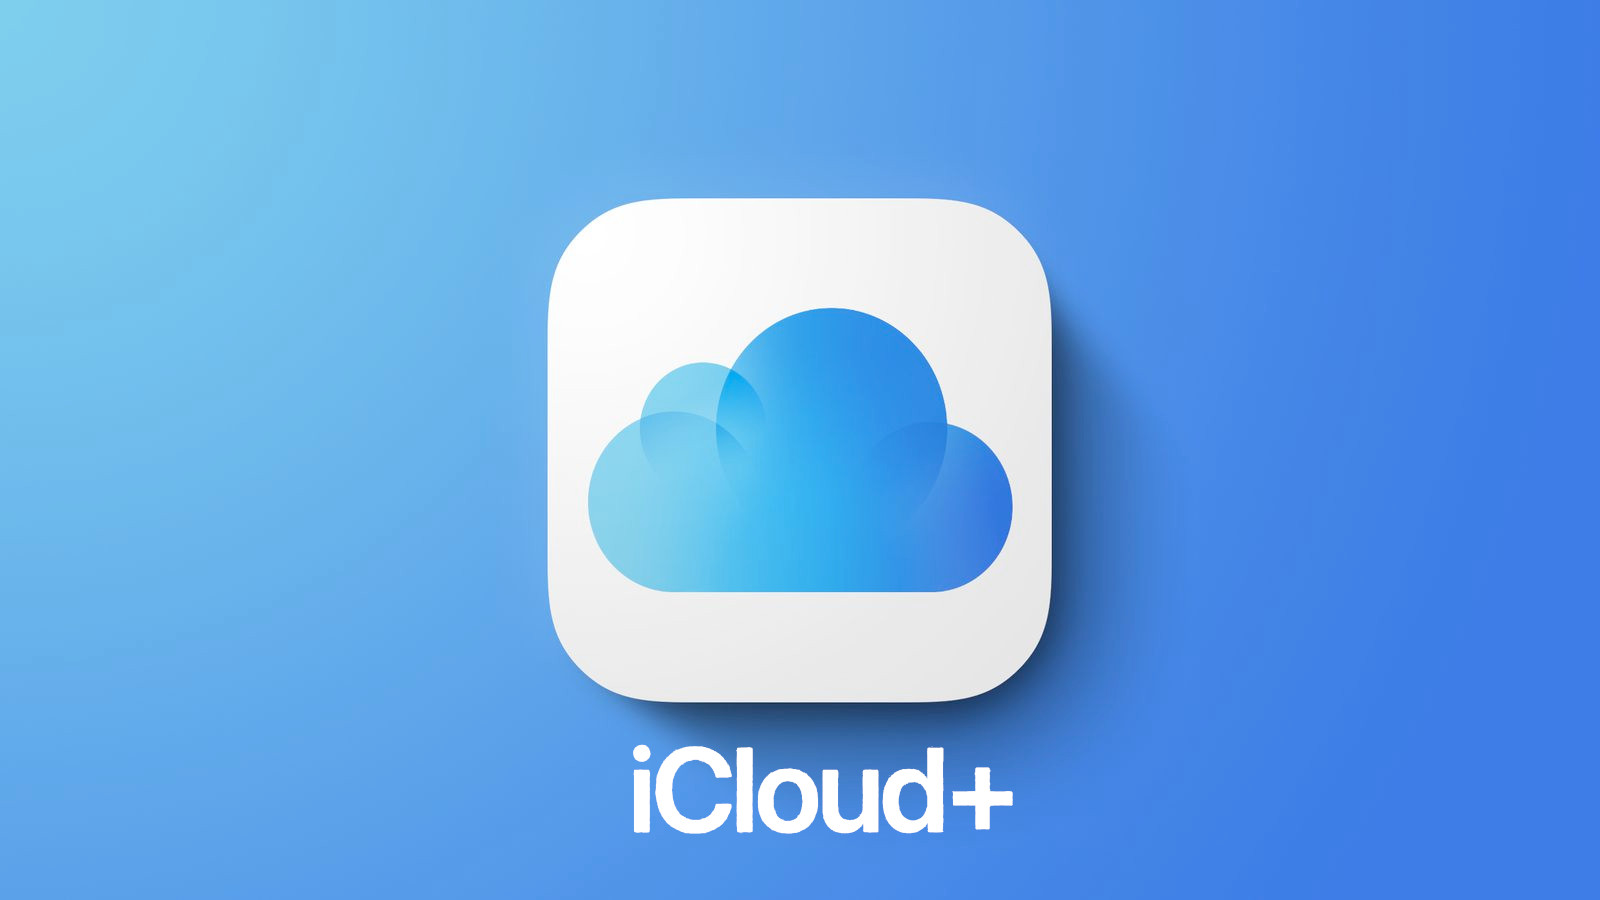 iCloud+ 50GB - 3 Months Trial Subscription US (ONLY FOR NEW ACCOUNTS) [$ 0.31]